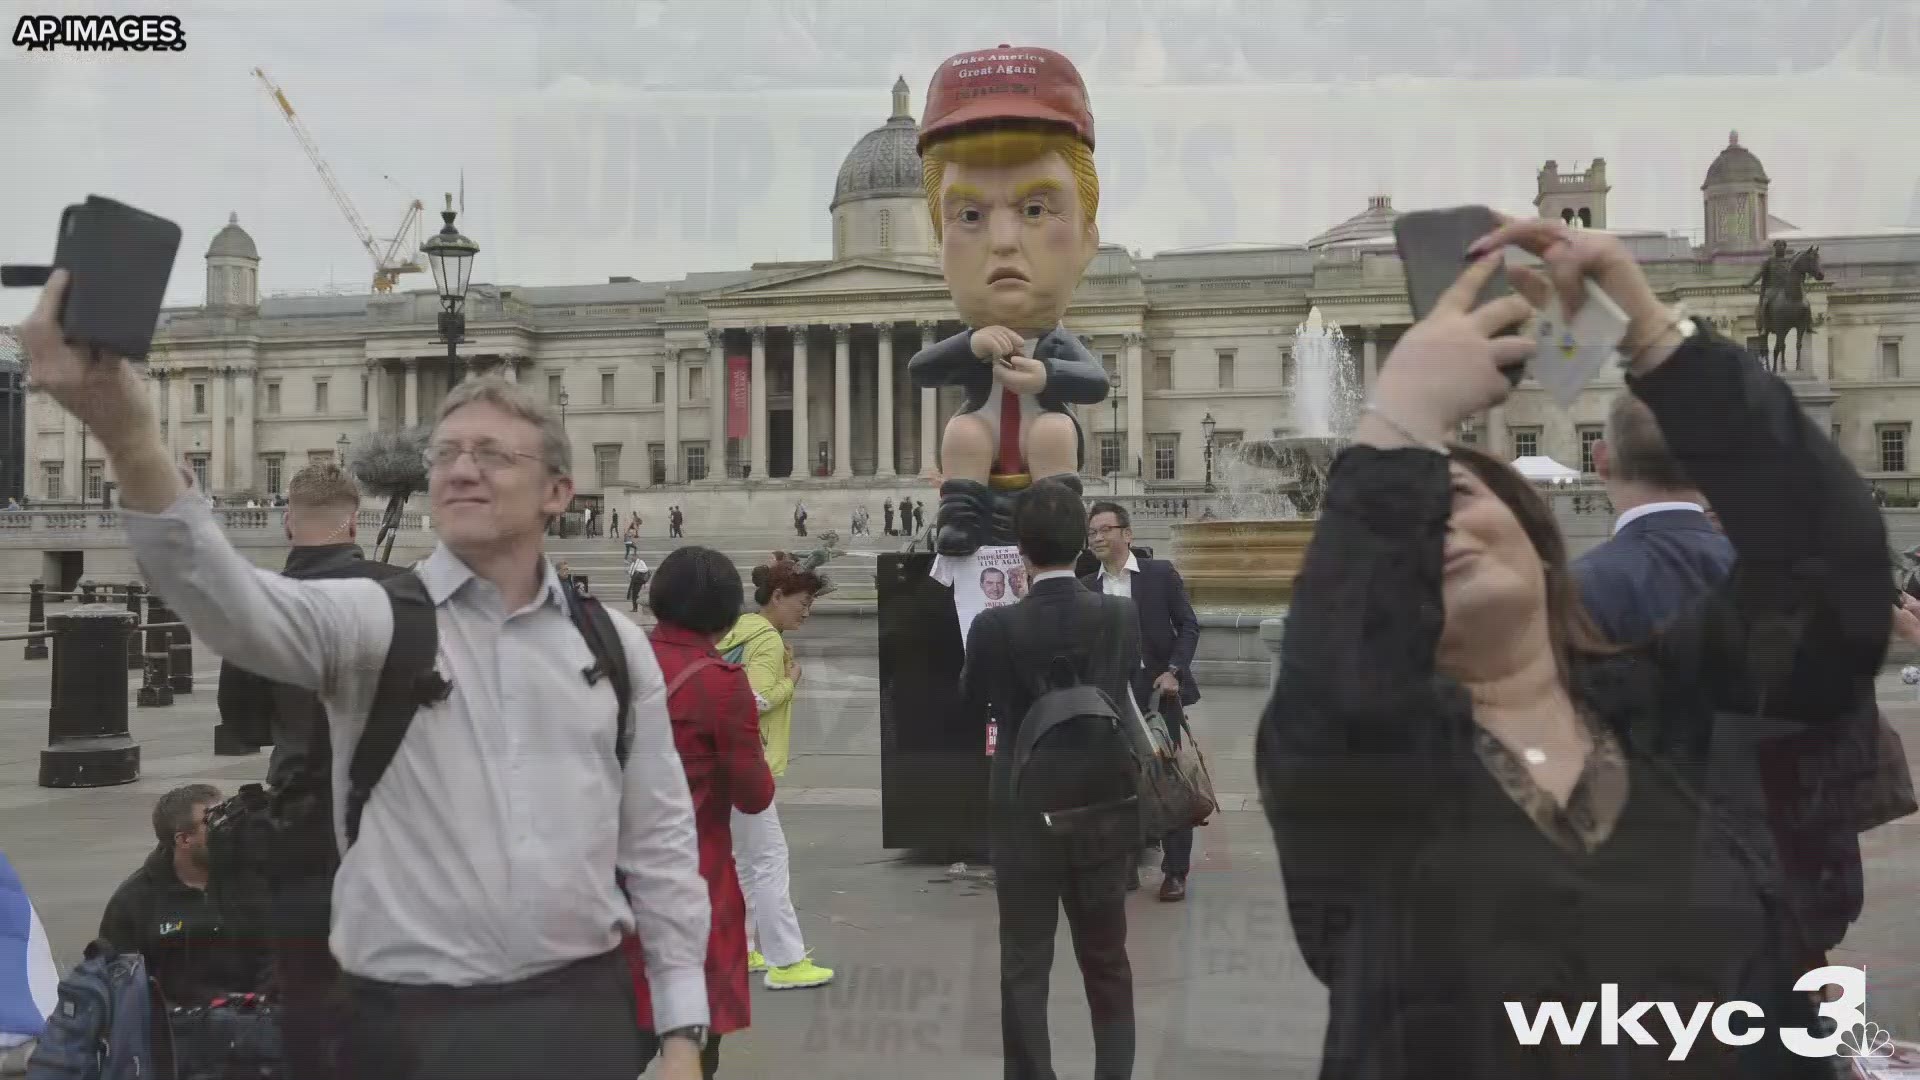 Thousands of demonstrators have gathered at Trafalgar Square in central London to protest against President Donald Trump's visit to the UK.